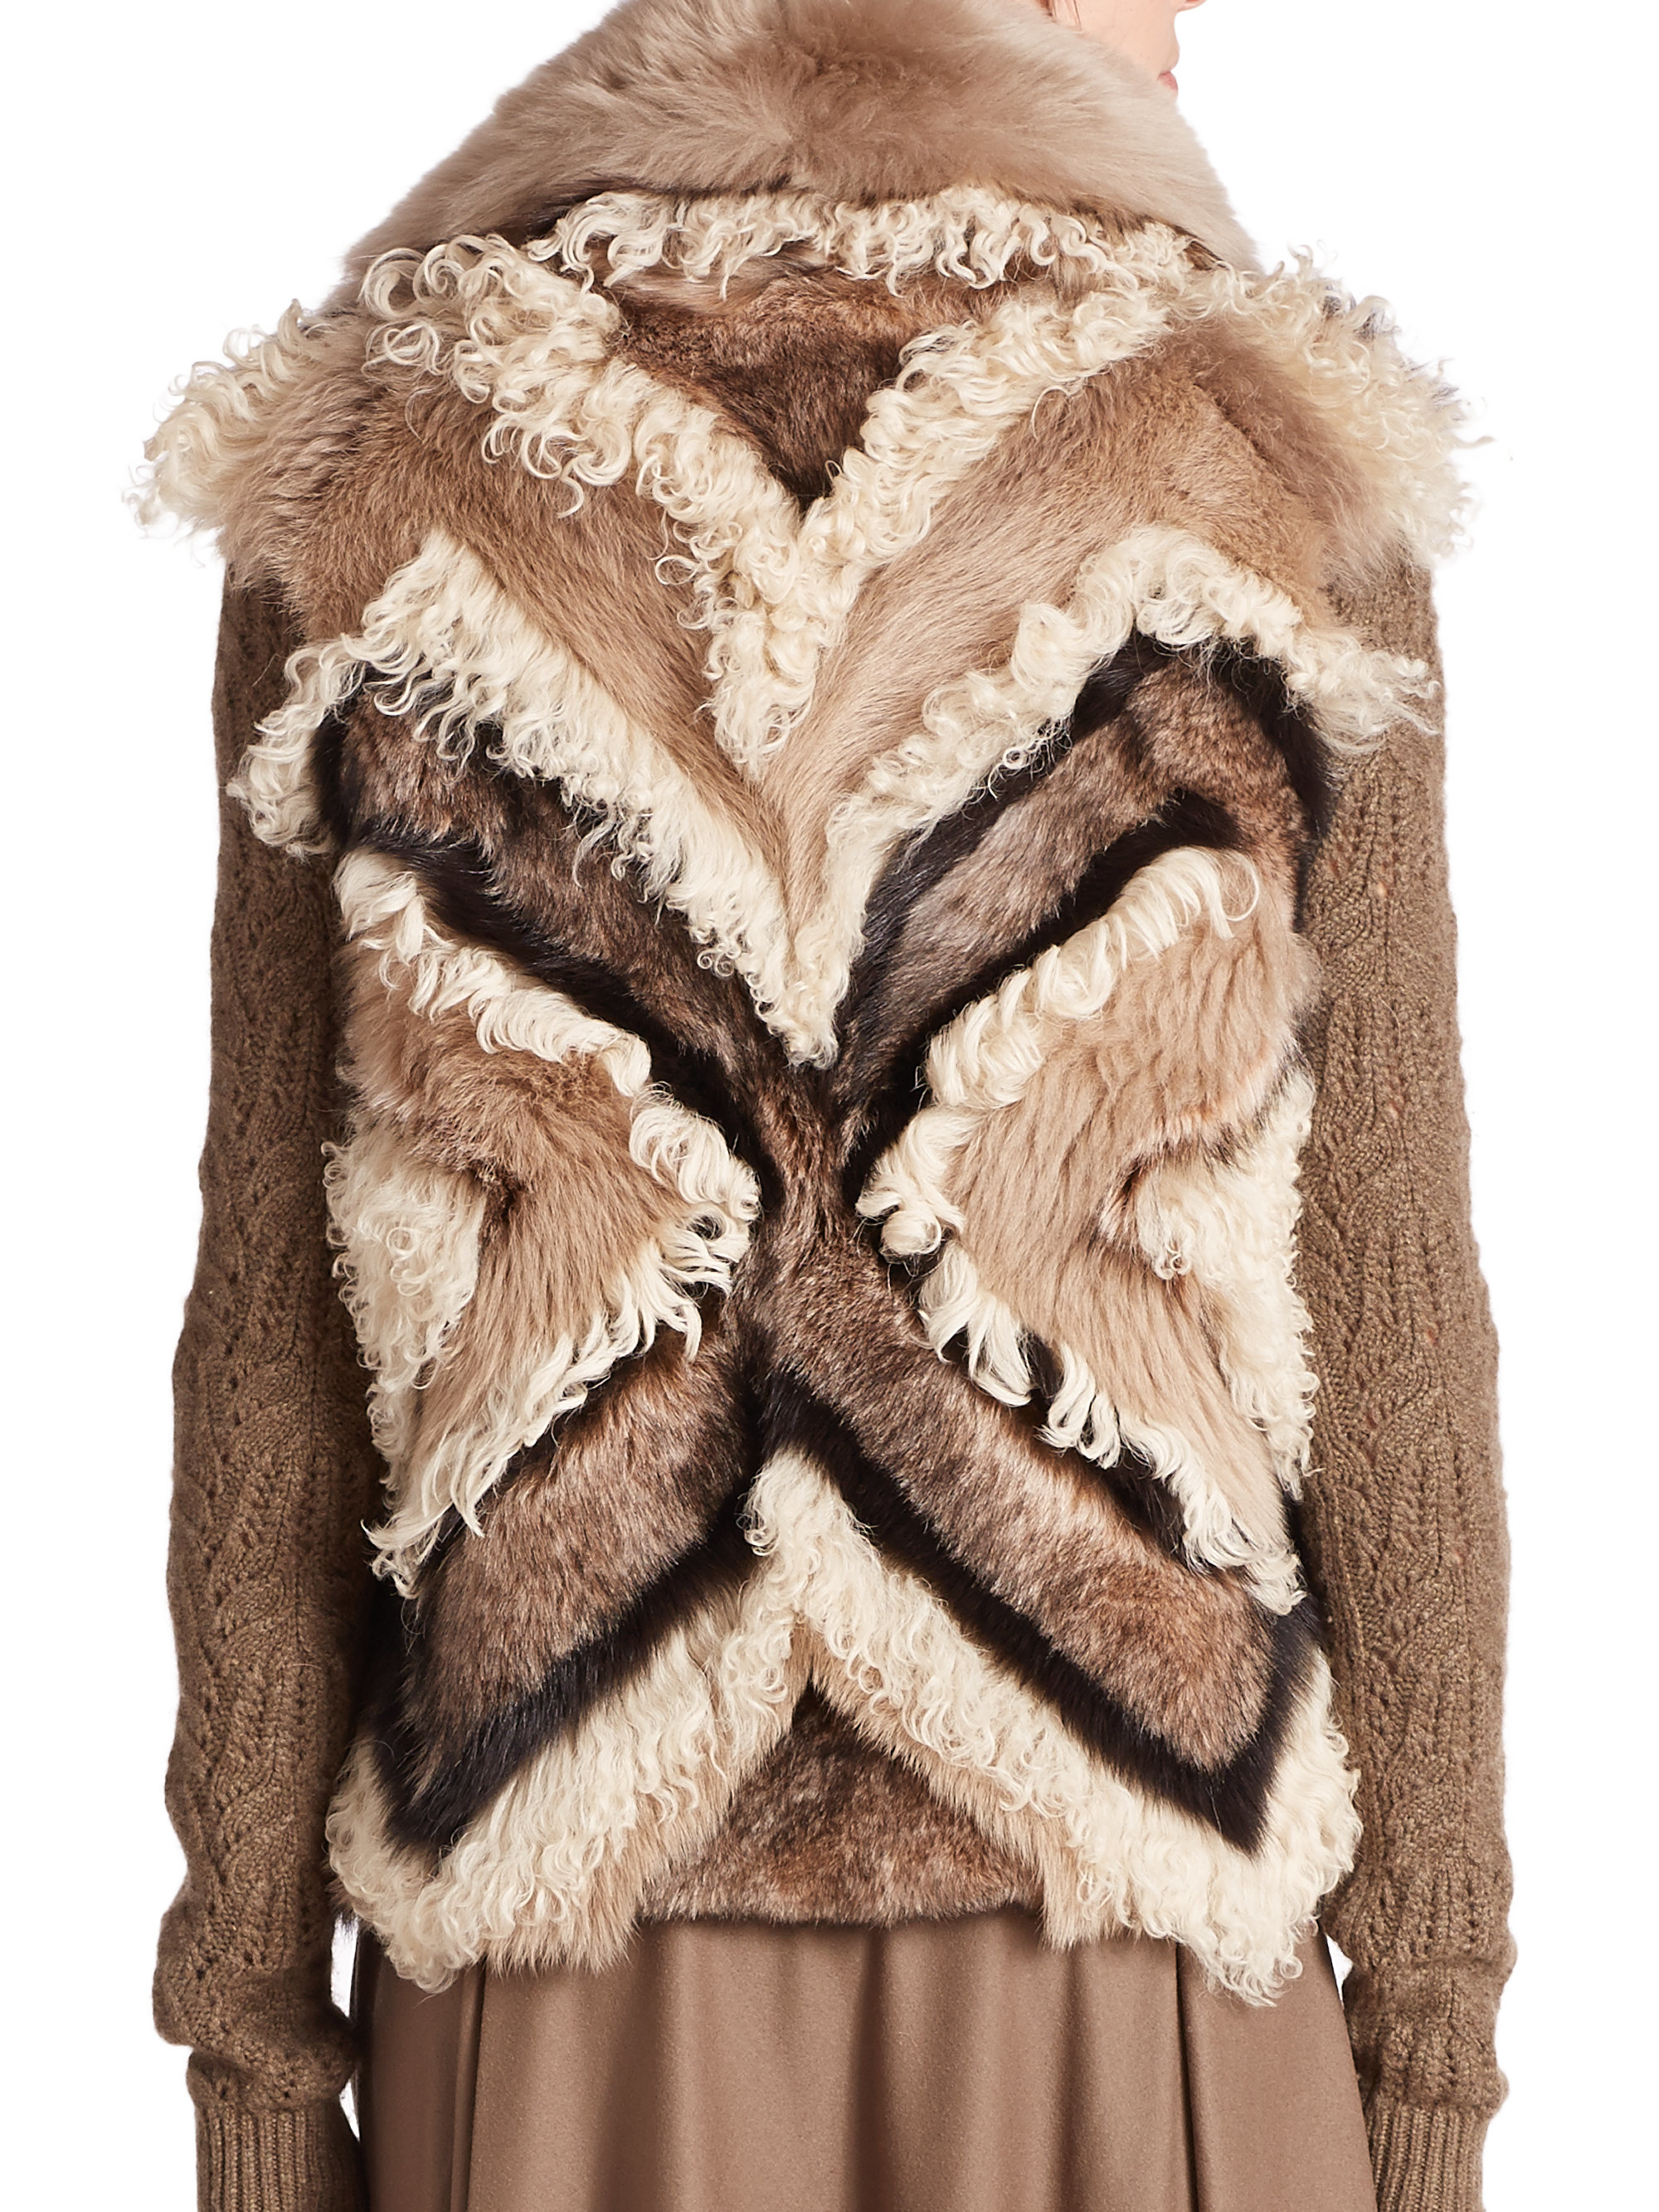 Ralph lauren collection Long Hair Shearling Fur Vest in Brown | Lyst